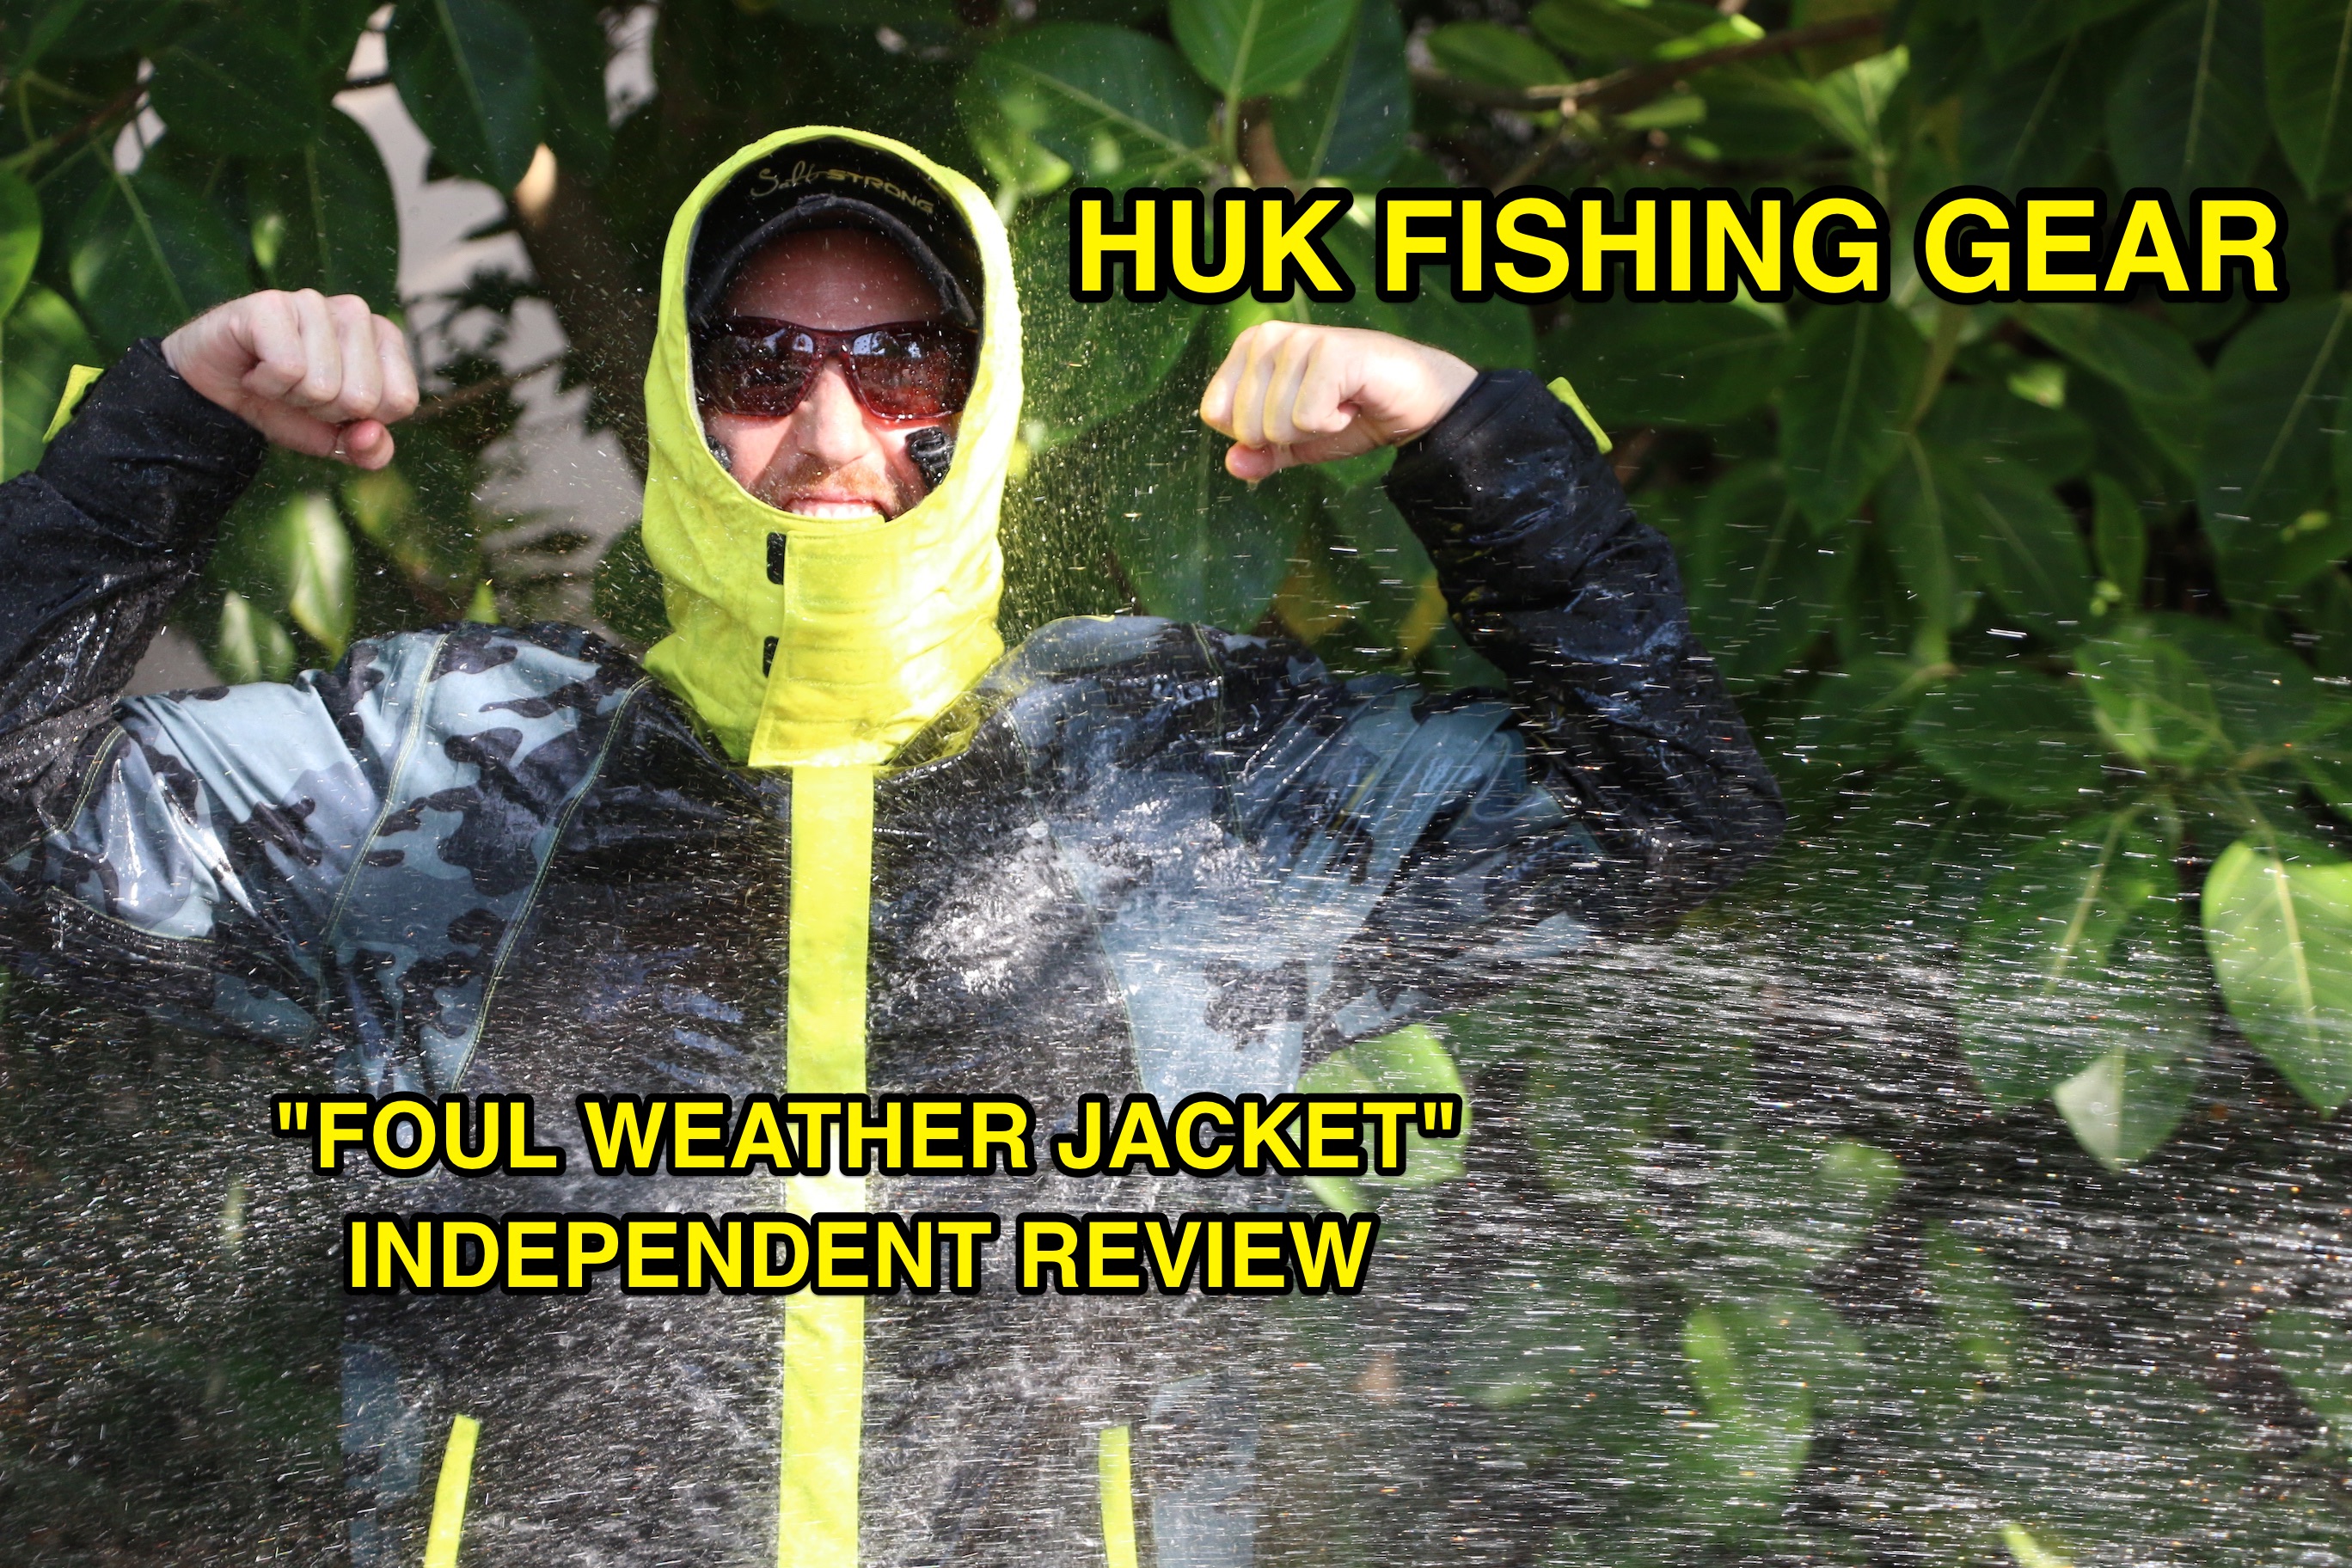 Huk Fishing Foul Weather Jacket Independent Review